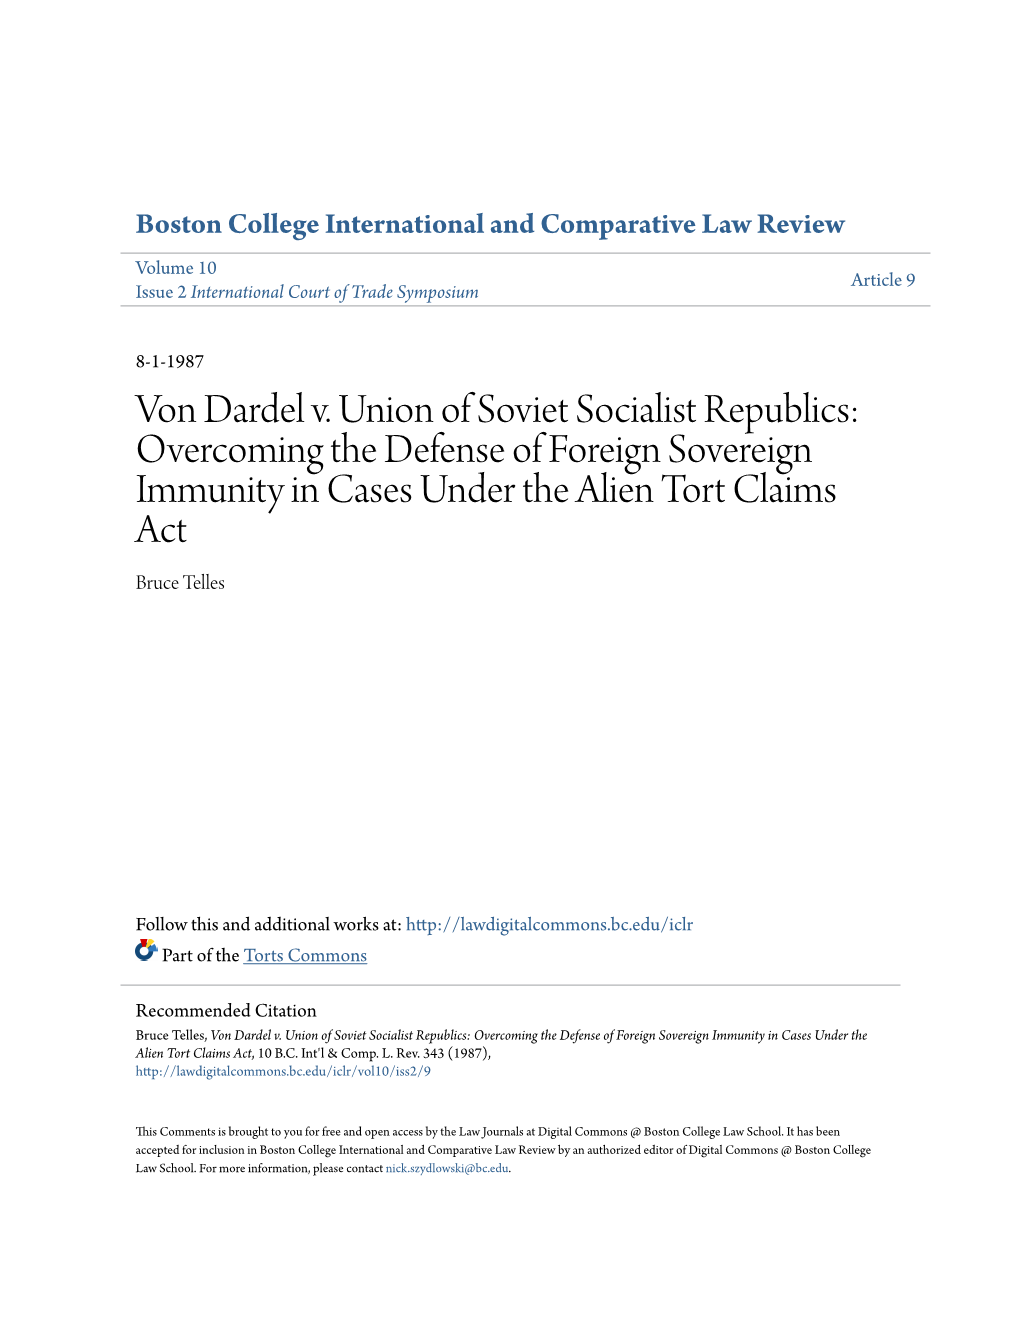 Von Dardel V. Union of Soviet Socialist Republics: Overcoming the Defense of Foreign Sovereign Immunity in Cases Under the Alien Tort Claims Act Bruce Telles